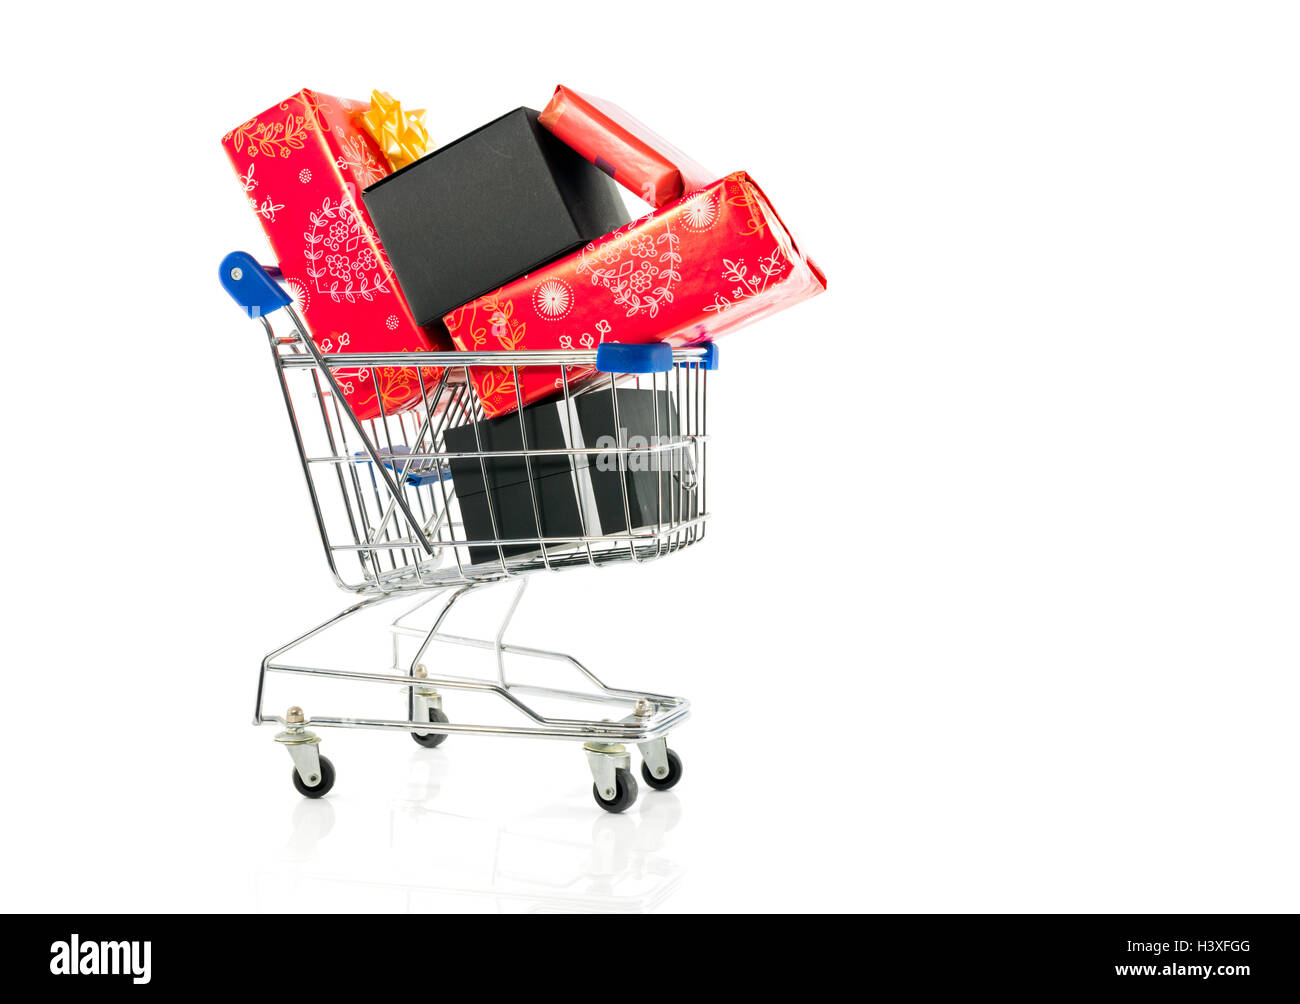 paying the presents in the shopping cart with credit card of bank card Stock Photo